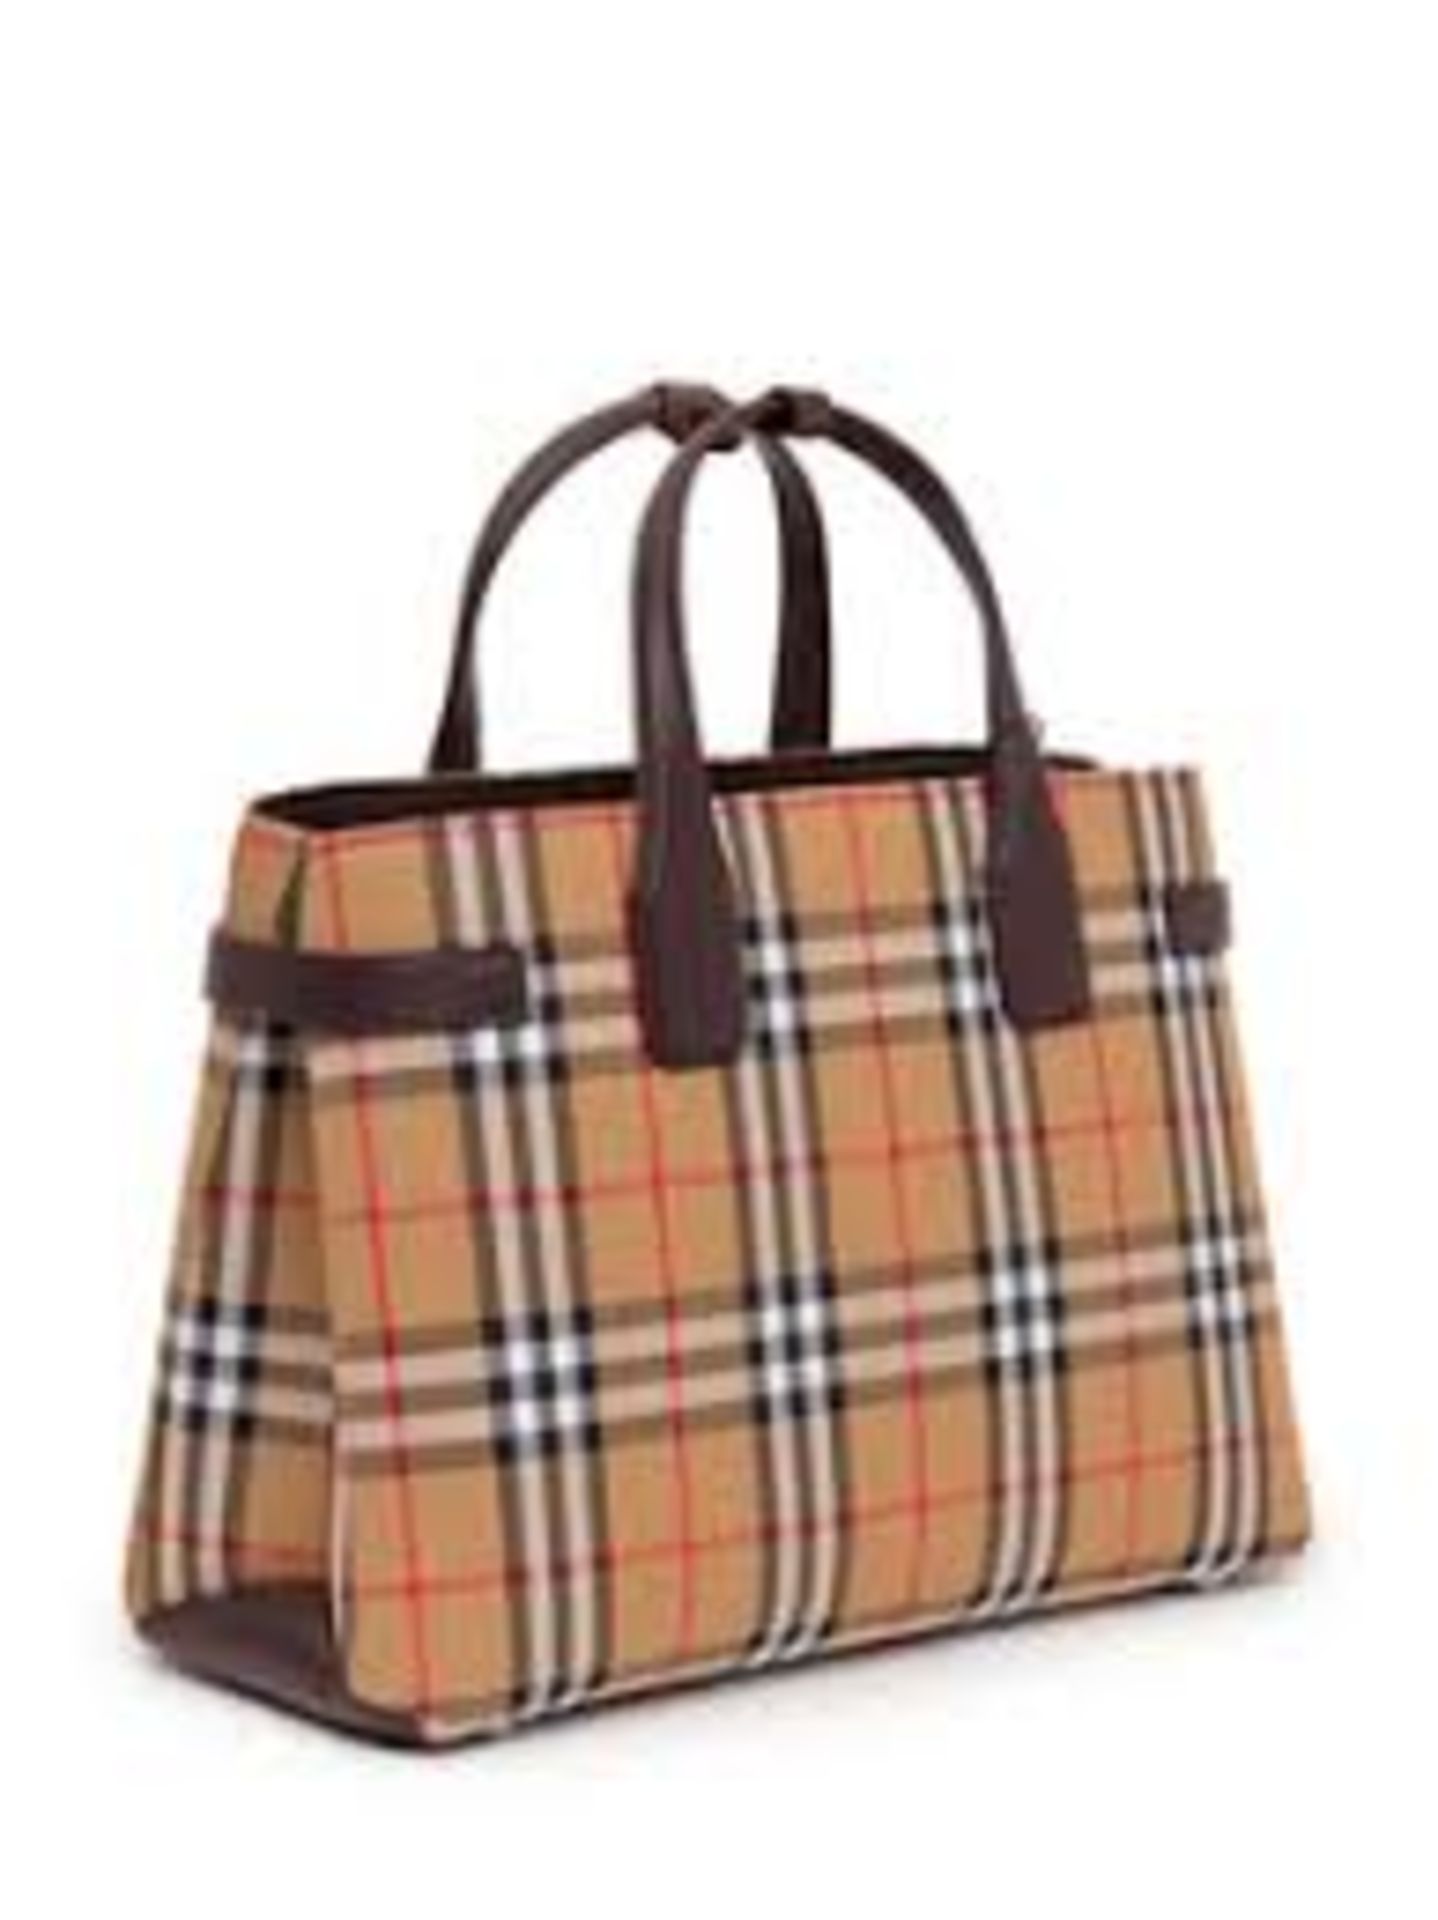 Burberry House Check Banner Tote Bag. 28x20cm.